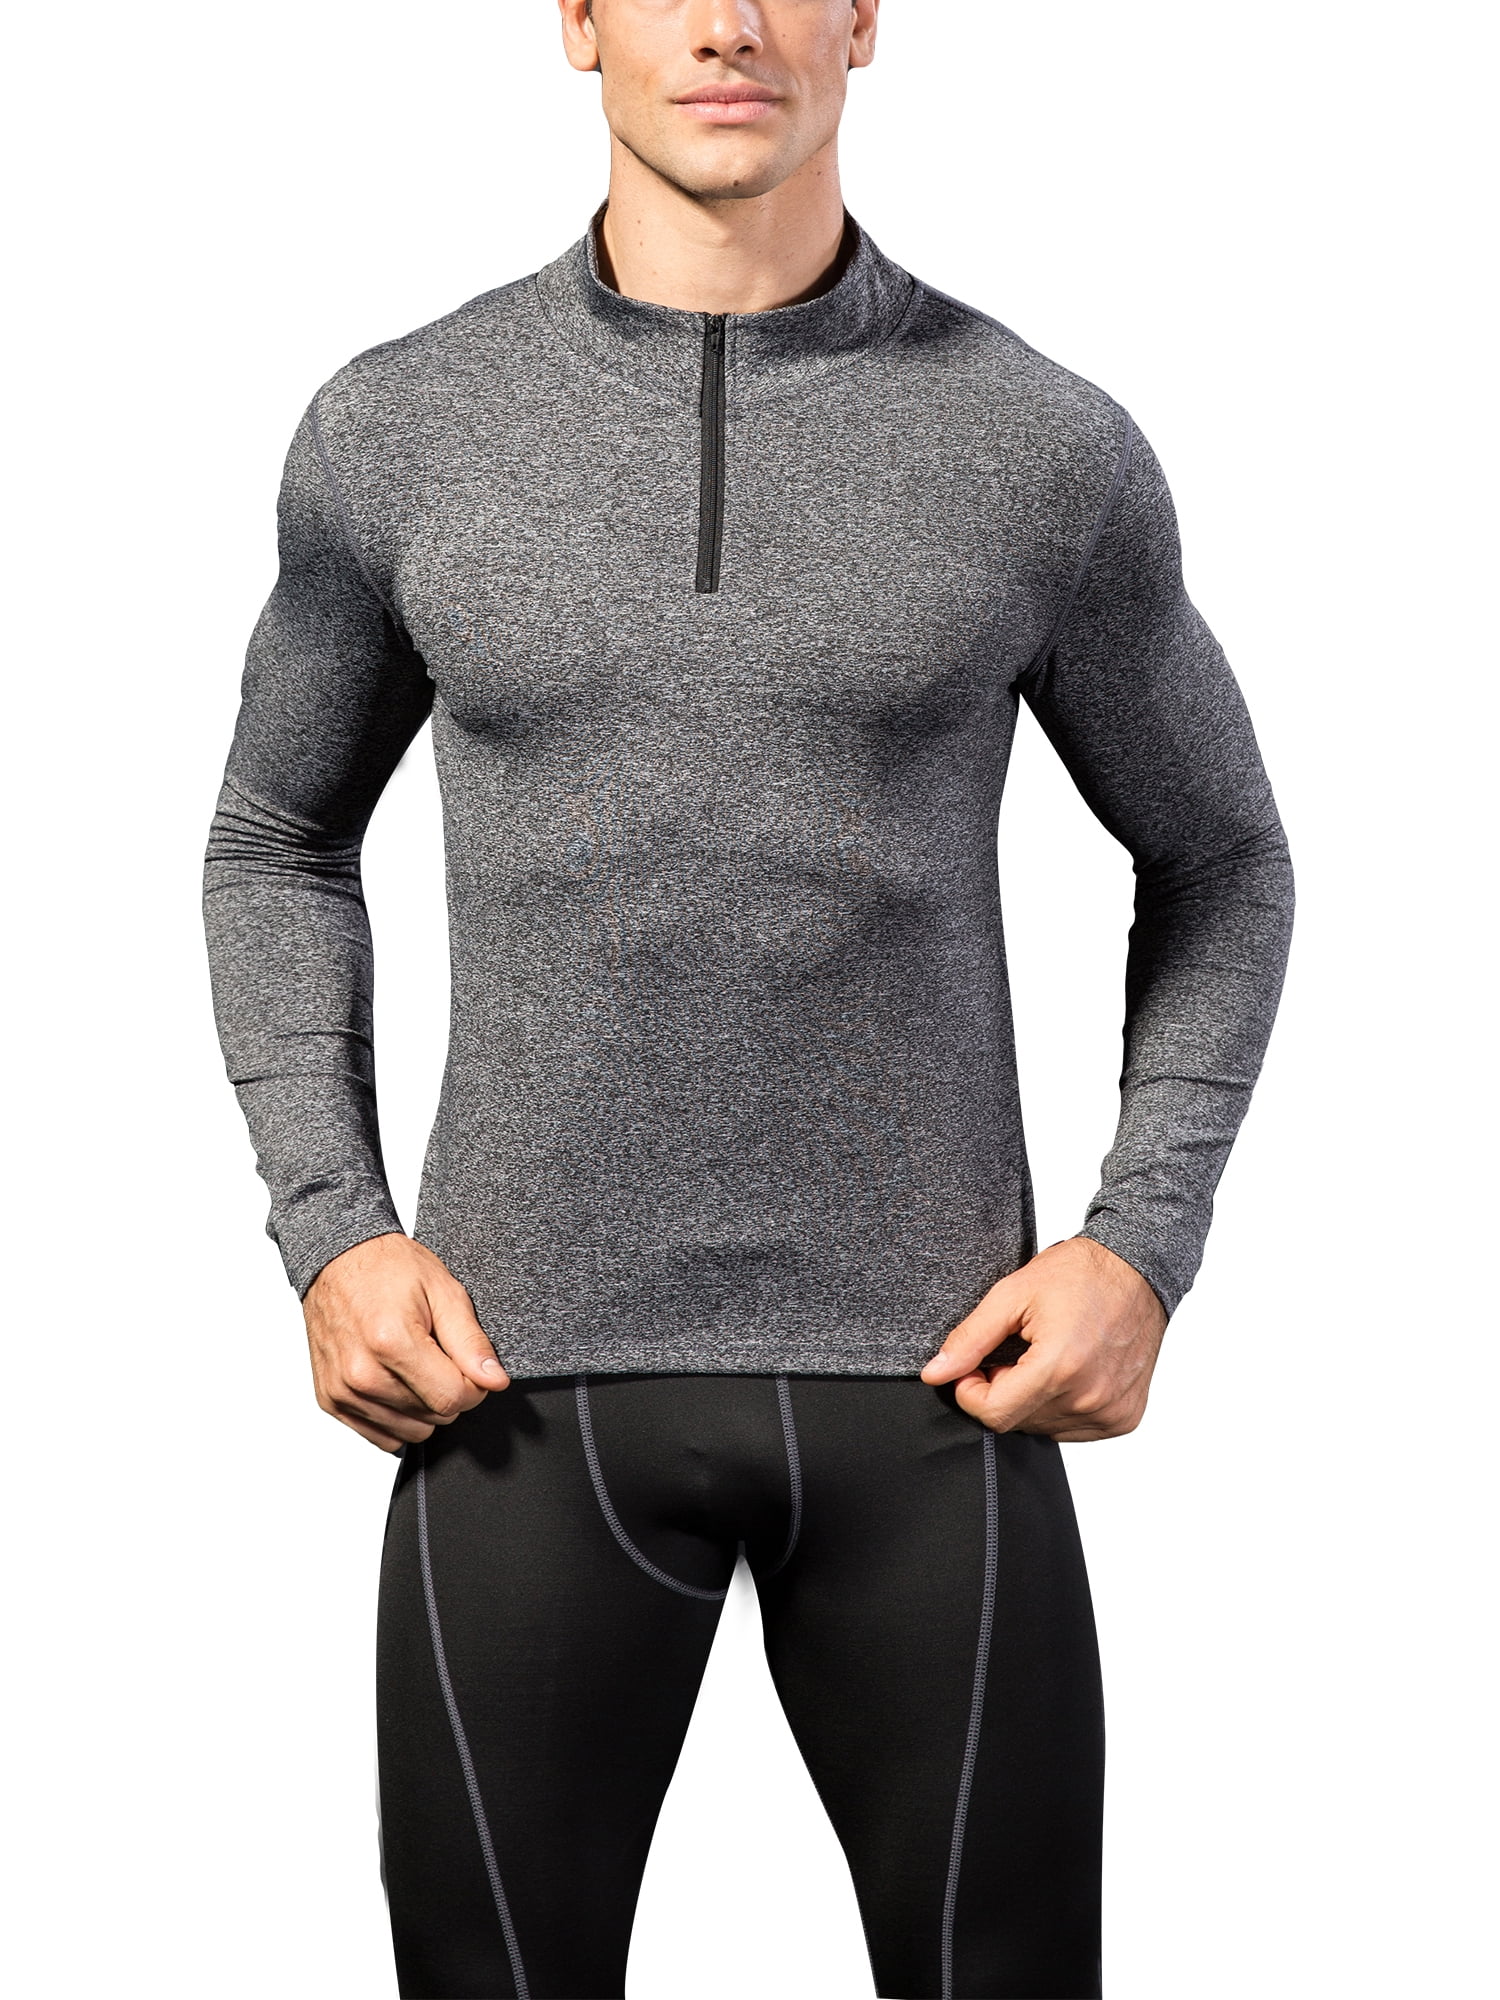 Men's Compression Tops Dri fit Long Sleeve Tights Under Base Layer Gym T-shirts 